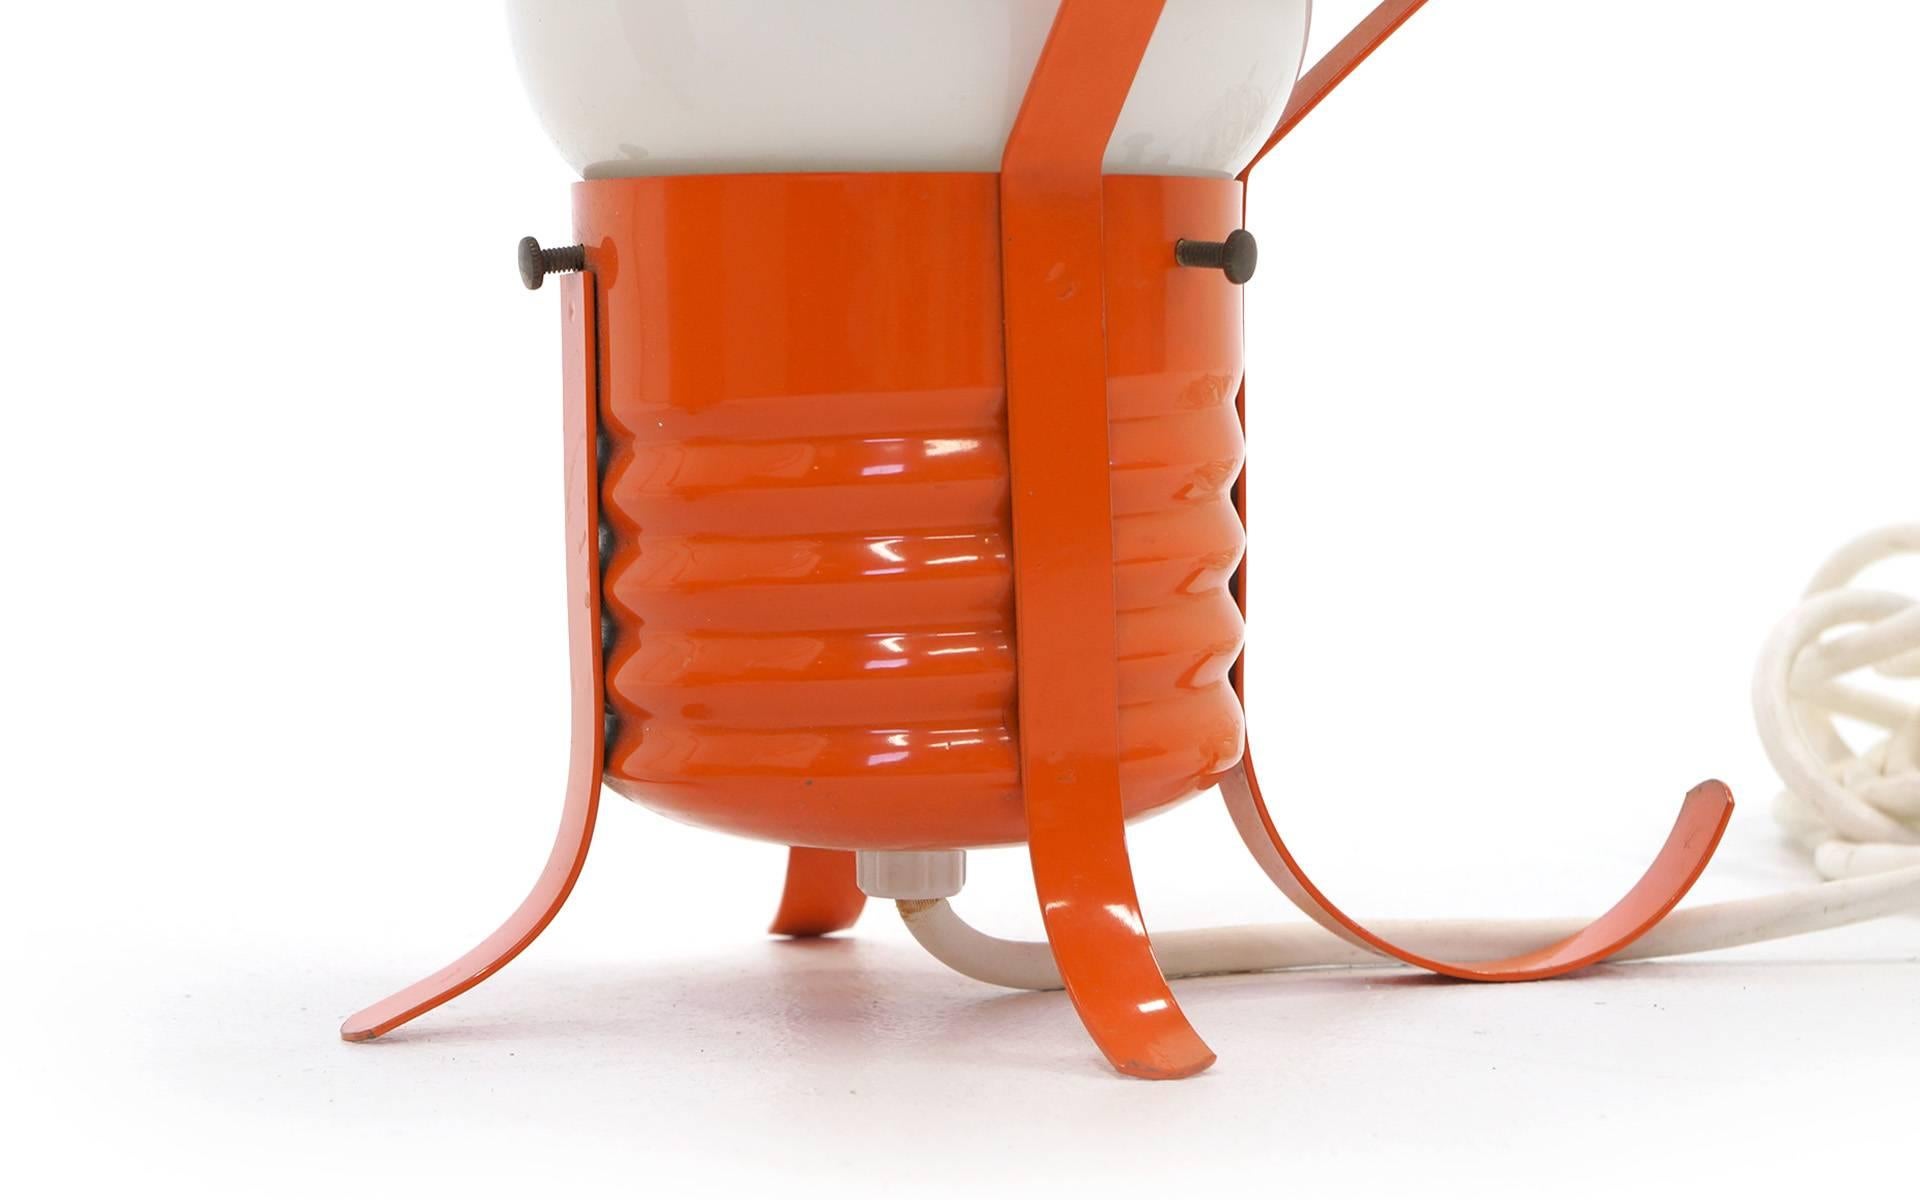 Pair of Oversized Pop Art Mod Light Bulb Table or Hanging Lamps, Orange Frames In Excellent Condition For Sale In Kansas City, MO